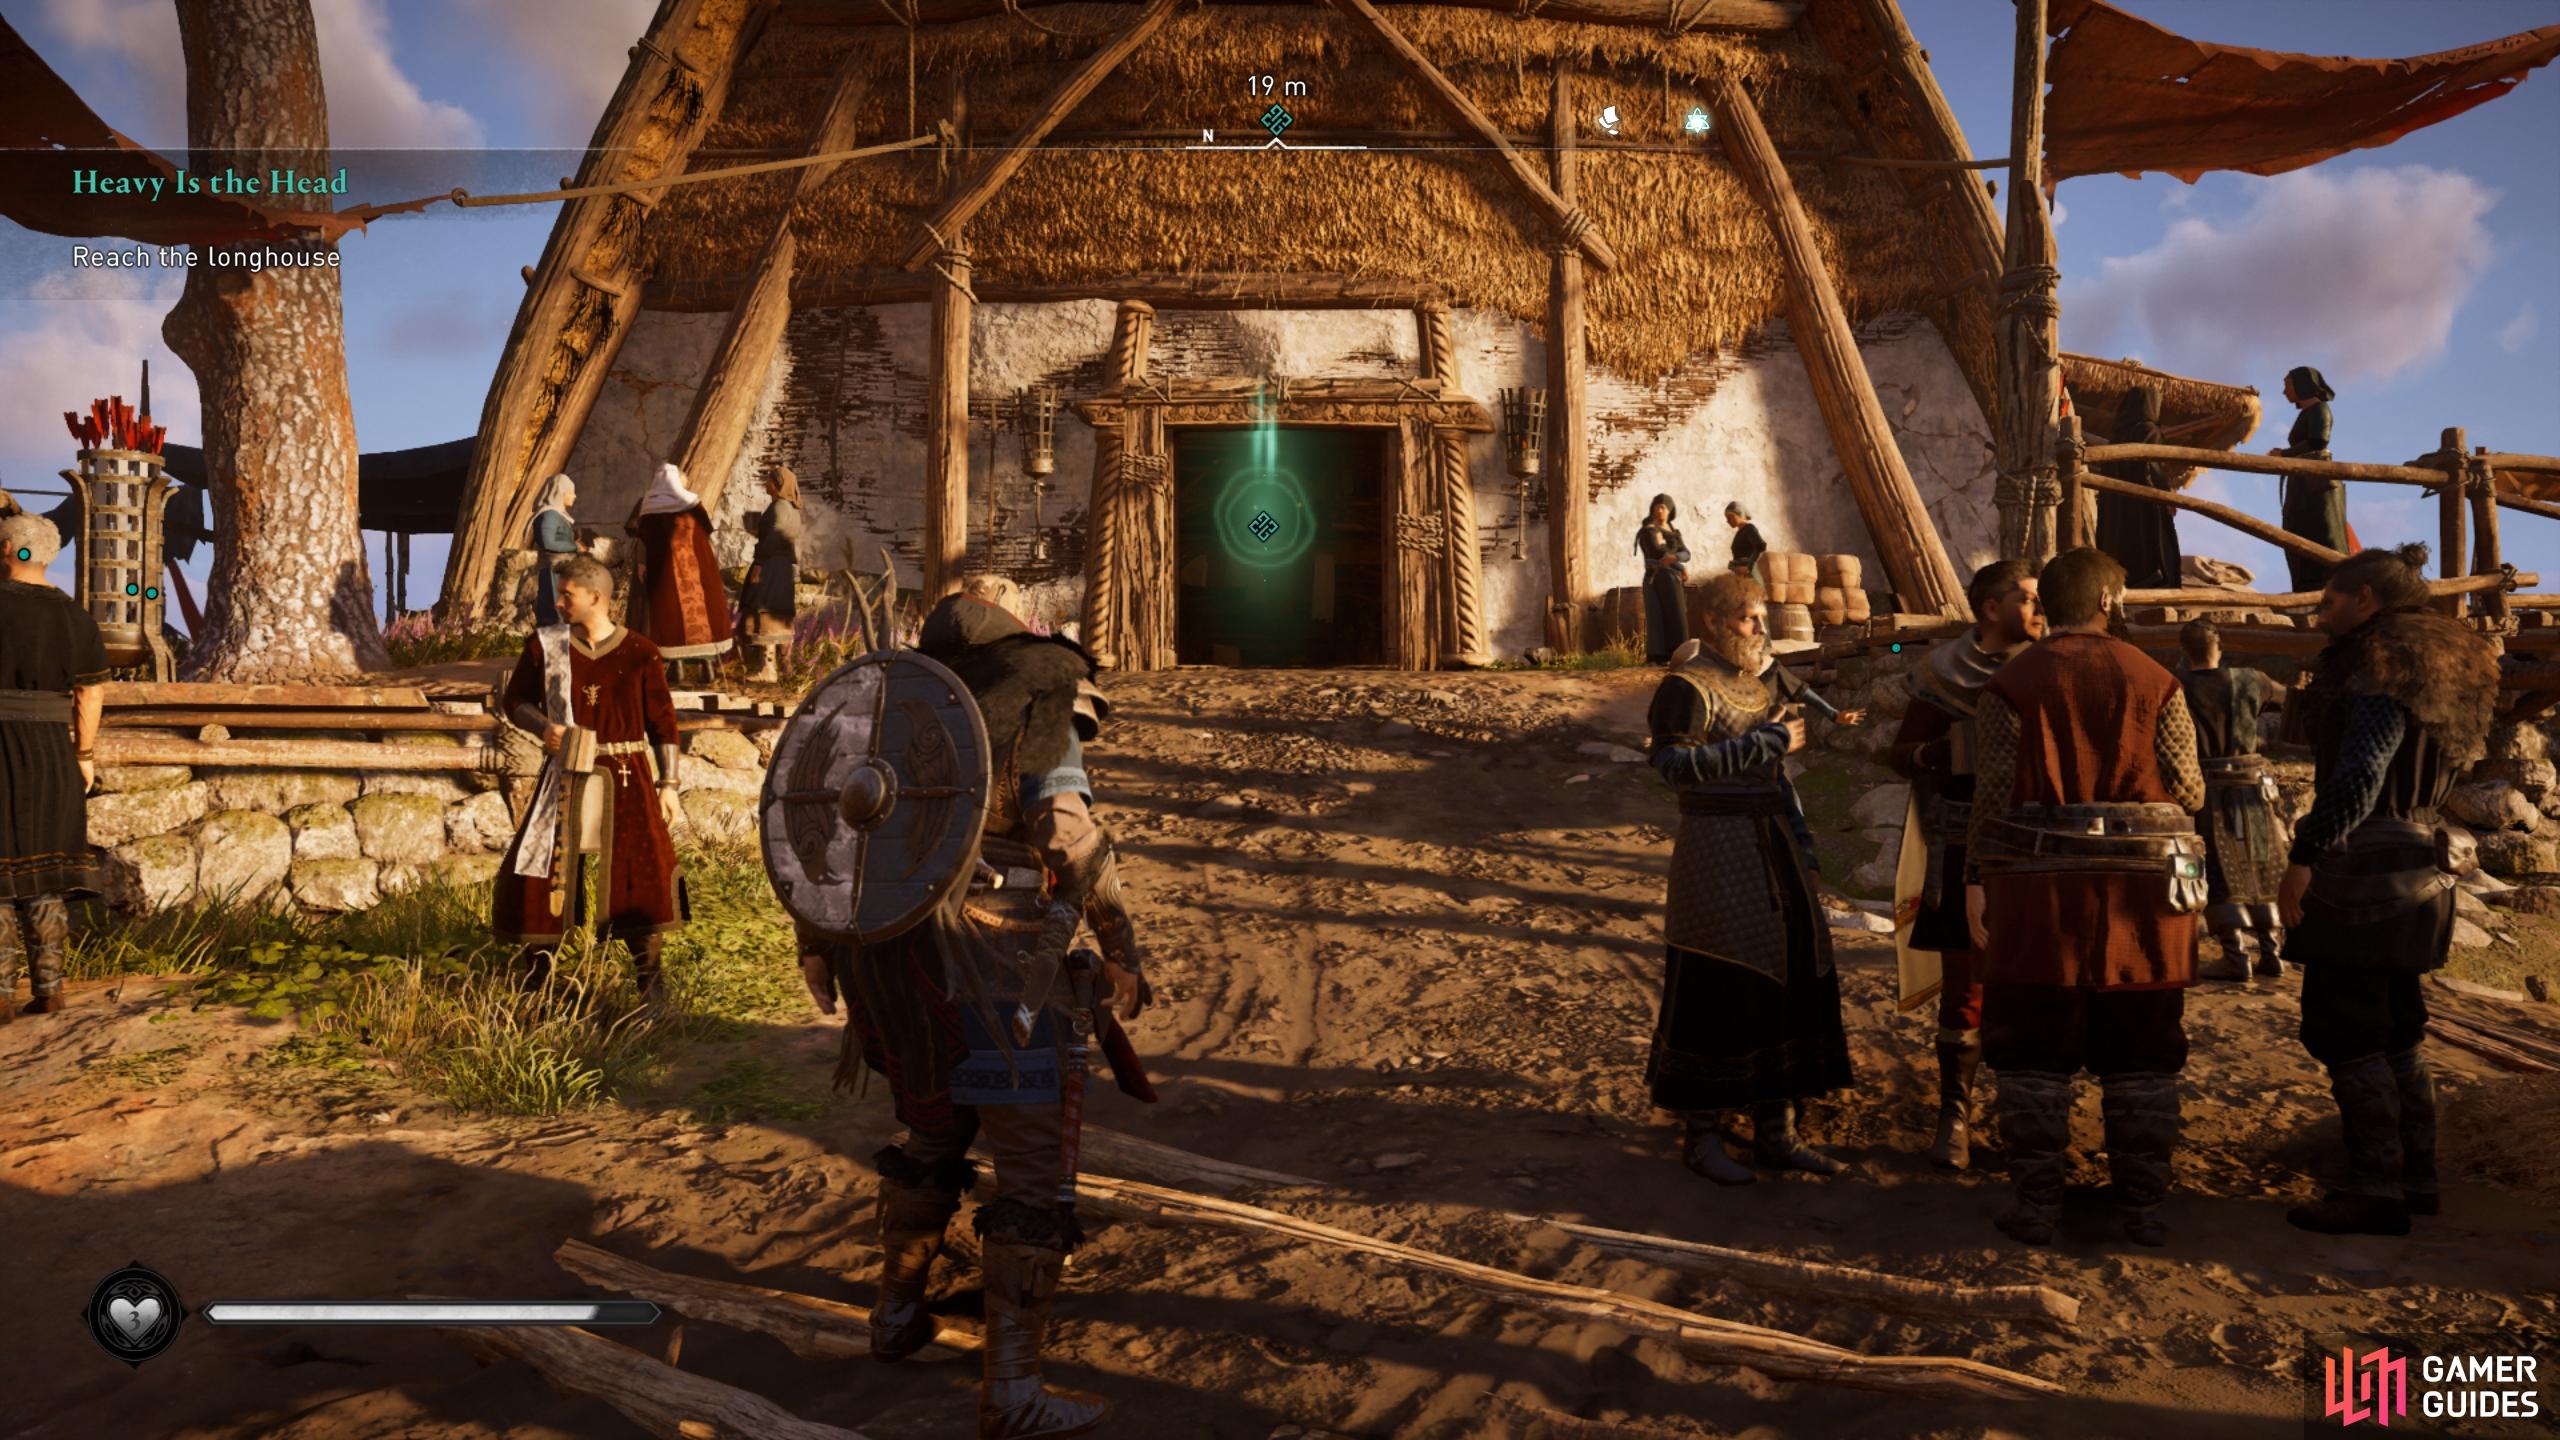 When you reach the longhouse, enter it to trigger a cutscene.